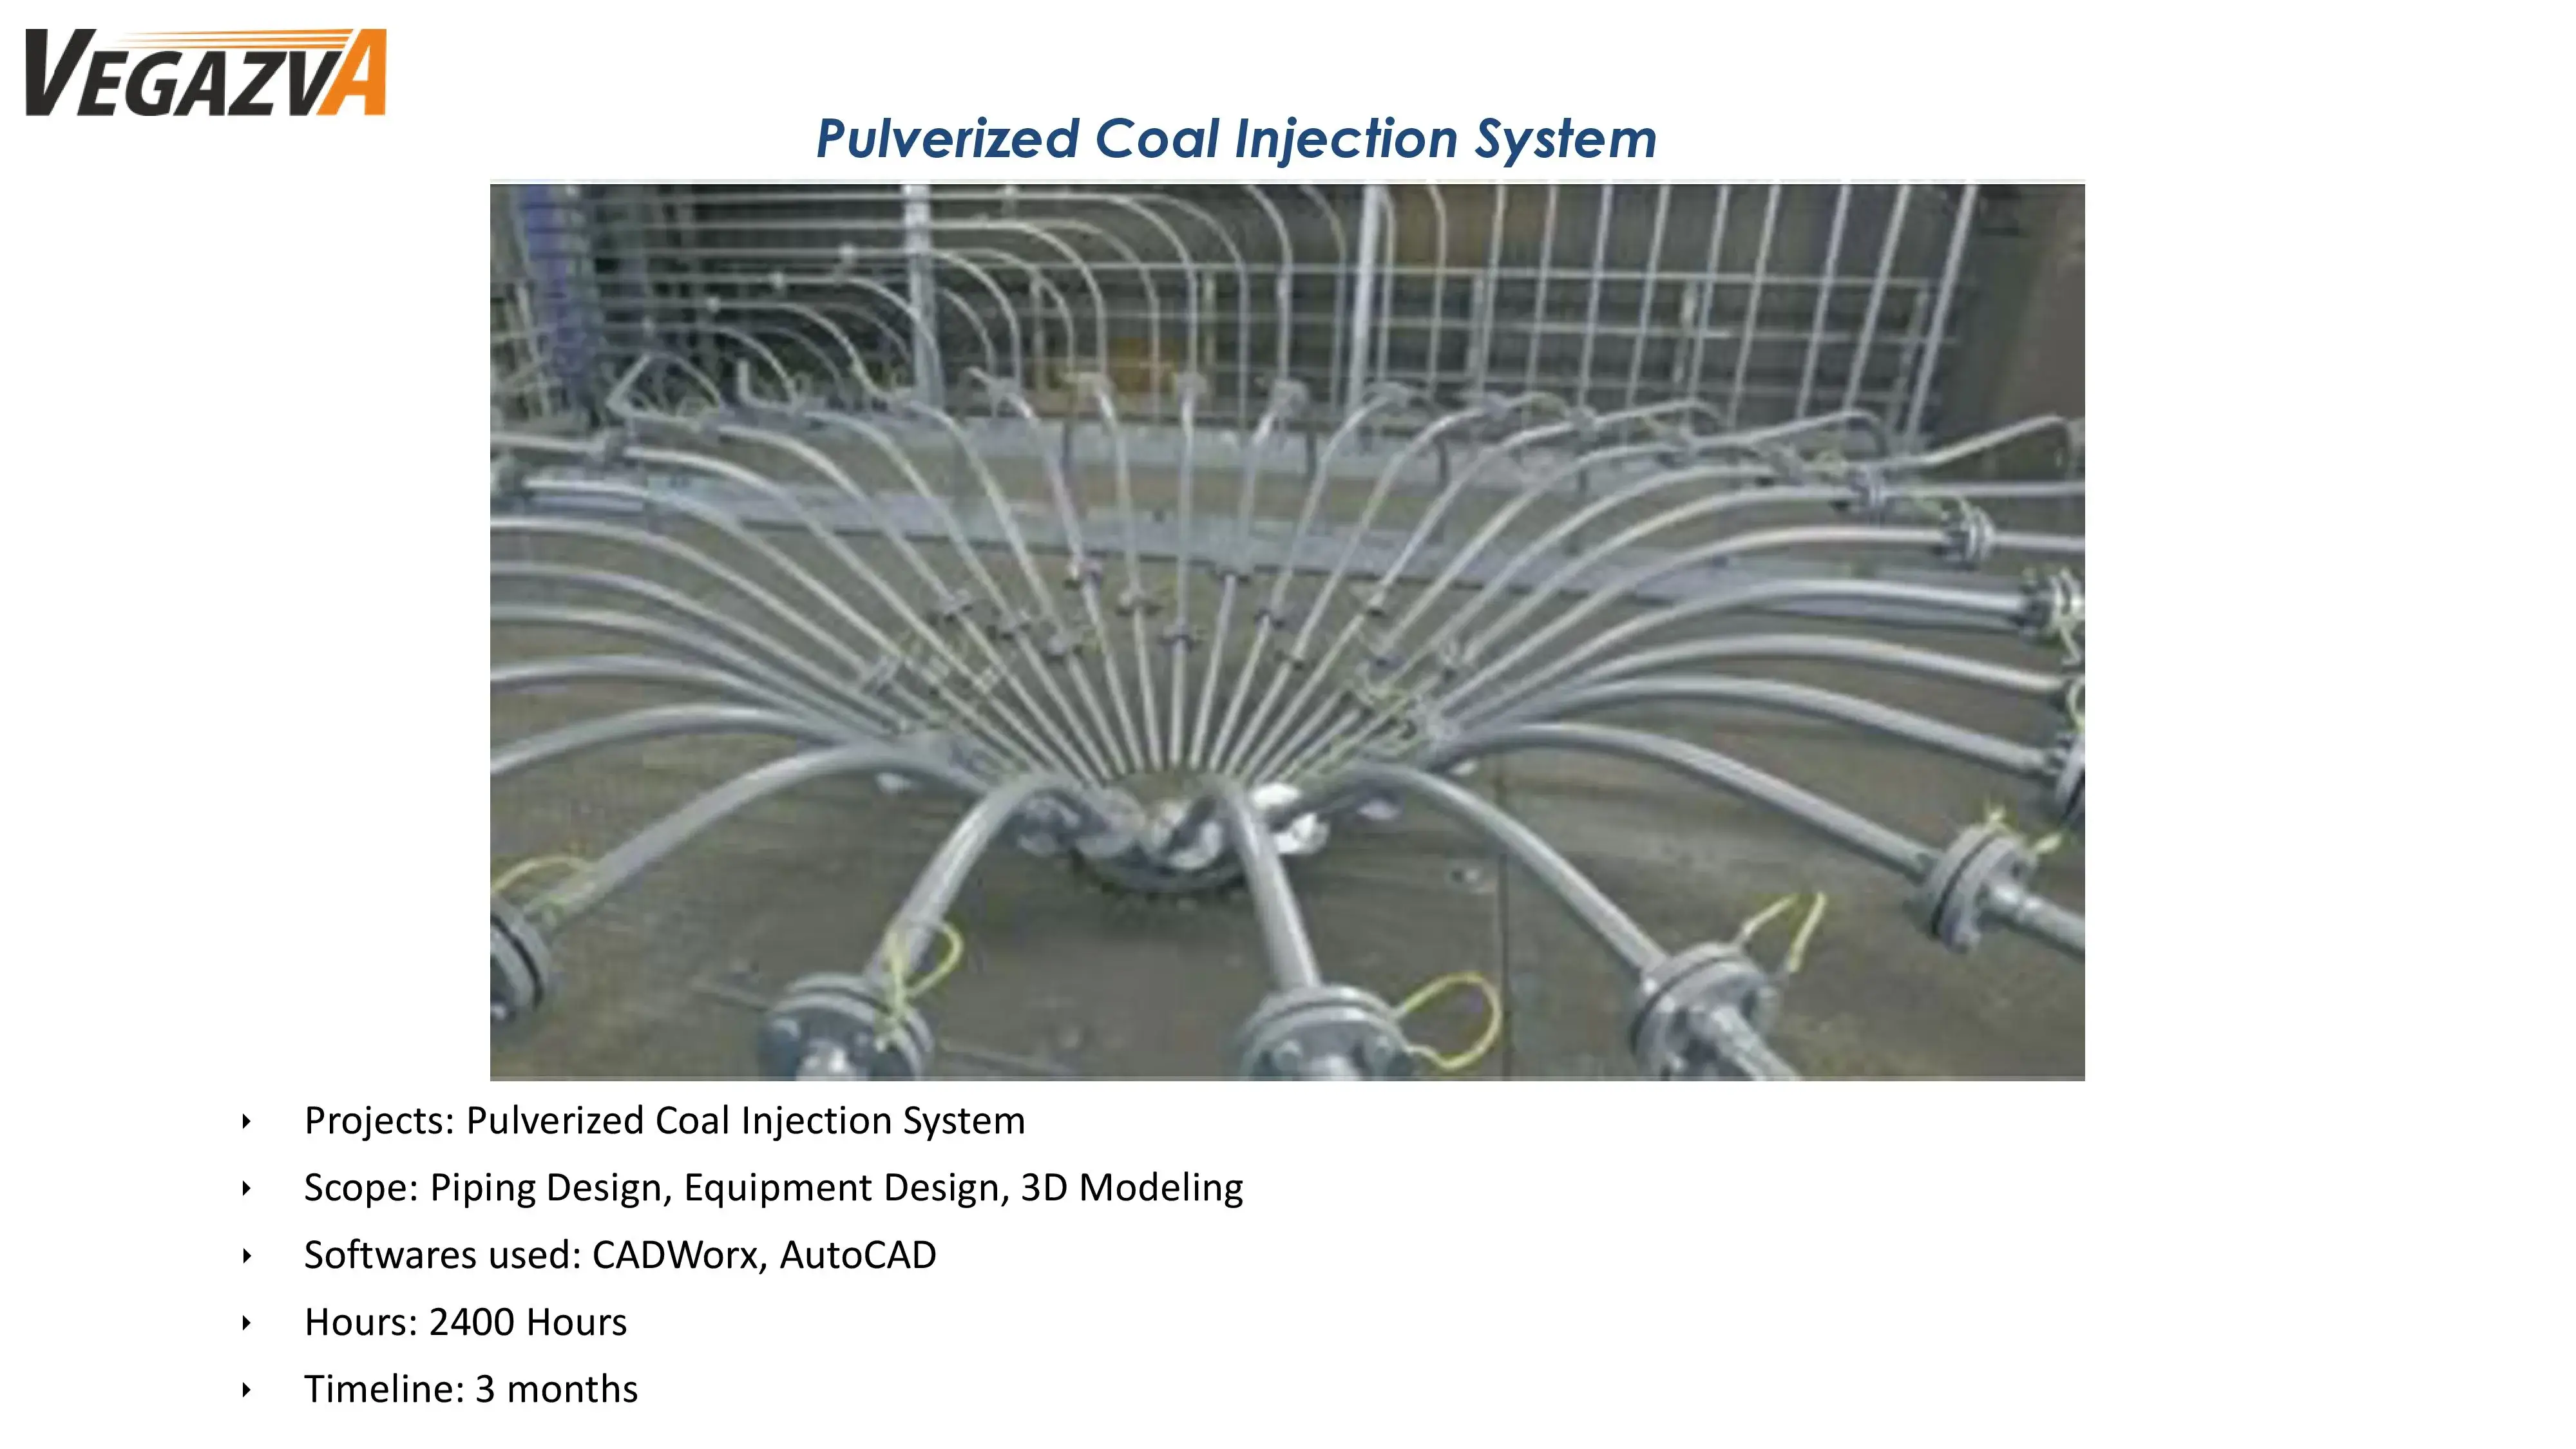 Pulverized Coal Injection System